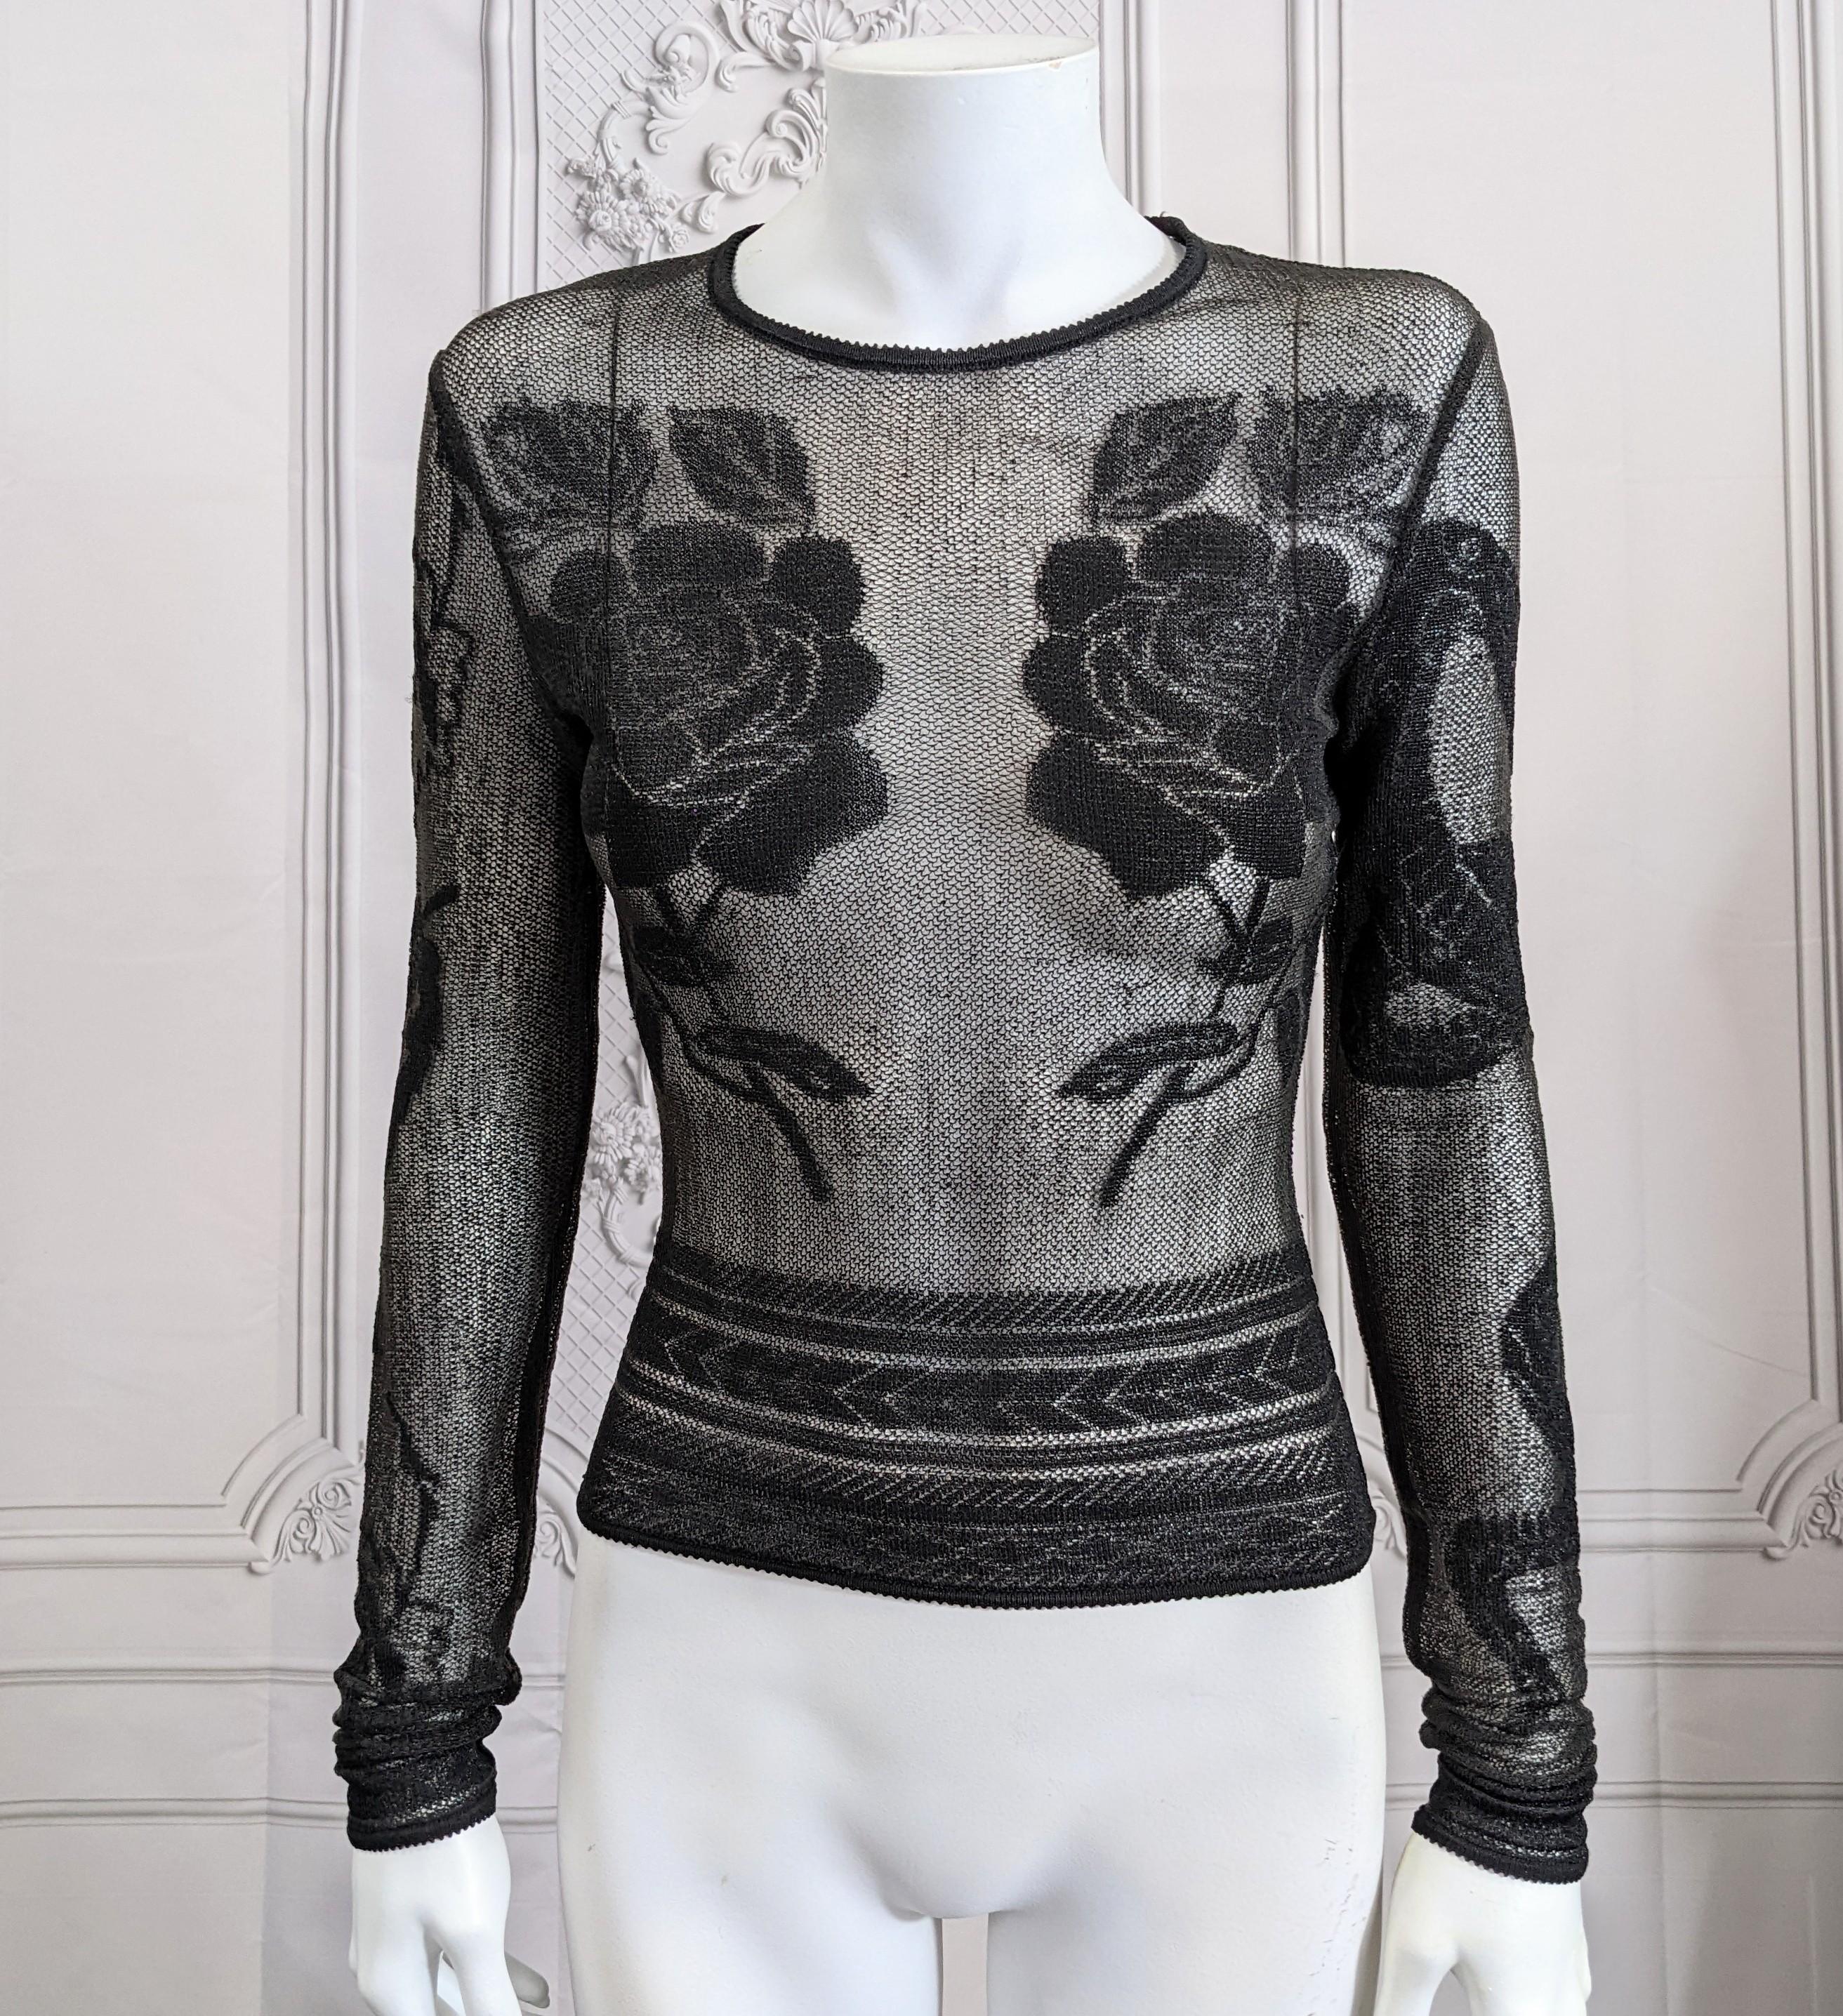 John Galliano F/W 1997/98 sheer transparent tinsel faux tattoo knit pullover from Galliano's Suzie Sphinx collection. The black lurex crew neck pullover's displaying front motifs of large roses, the back with crisscrossing American and Union jack